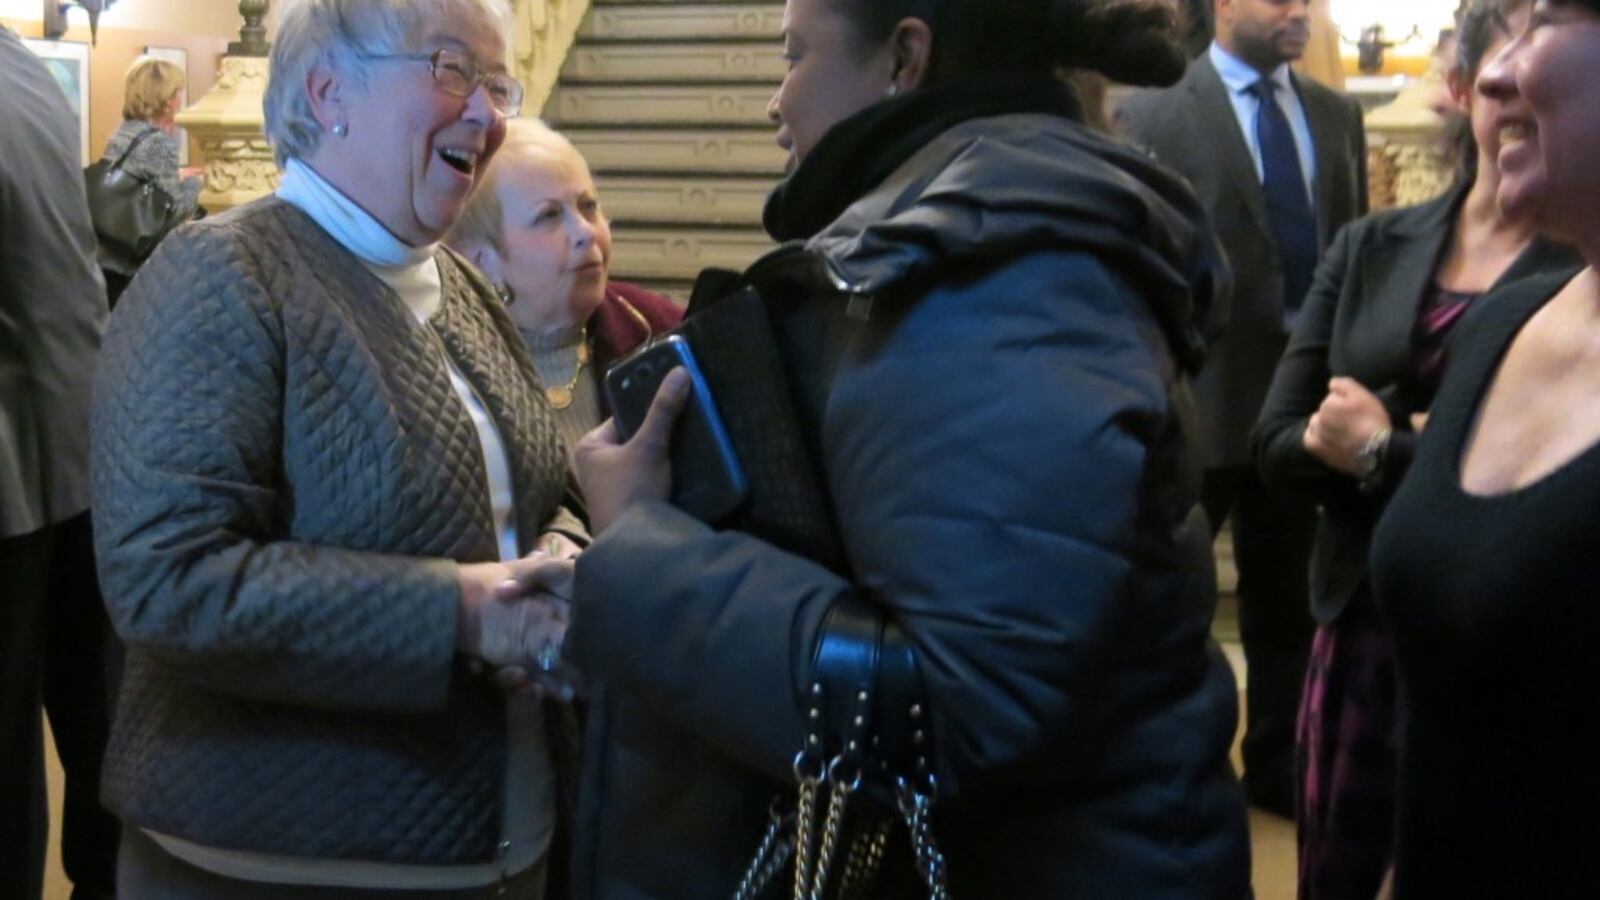 Chancellor Carmen Fariña greeted members of her staff at Department of Education headquarters today.